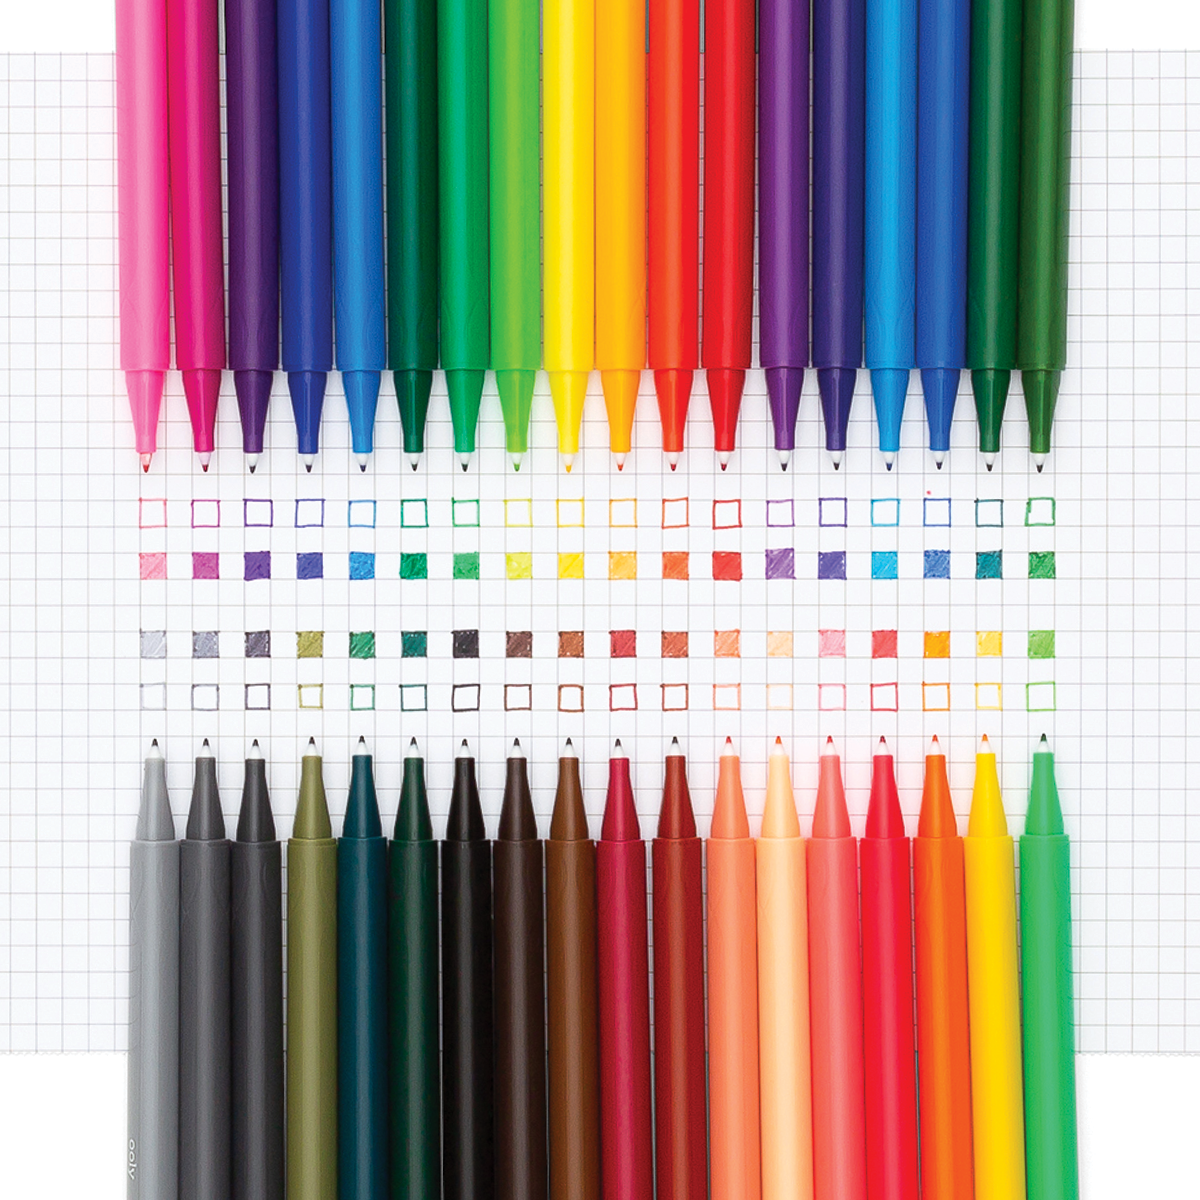 Seriously fine markers, with caps off, laid out on graph paper showing vibrant swatched colors